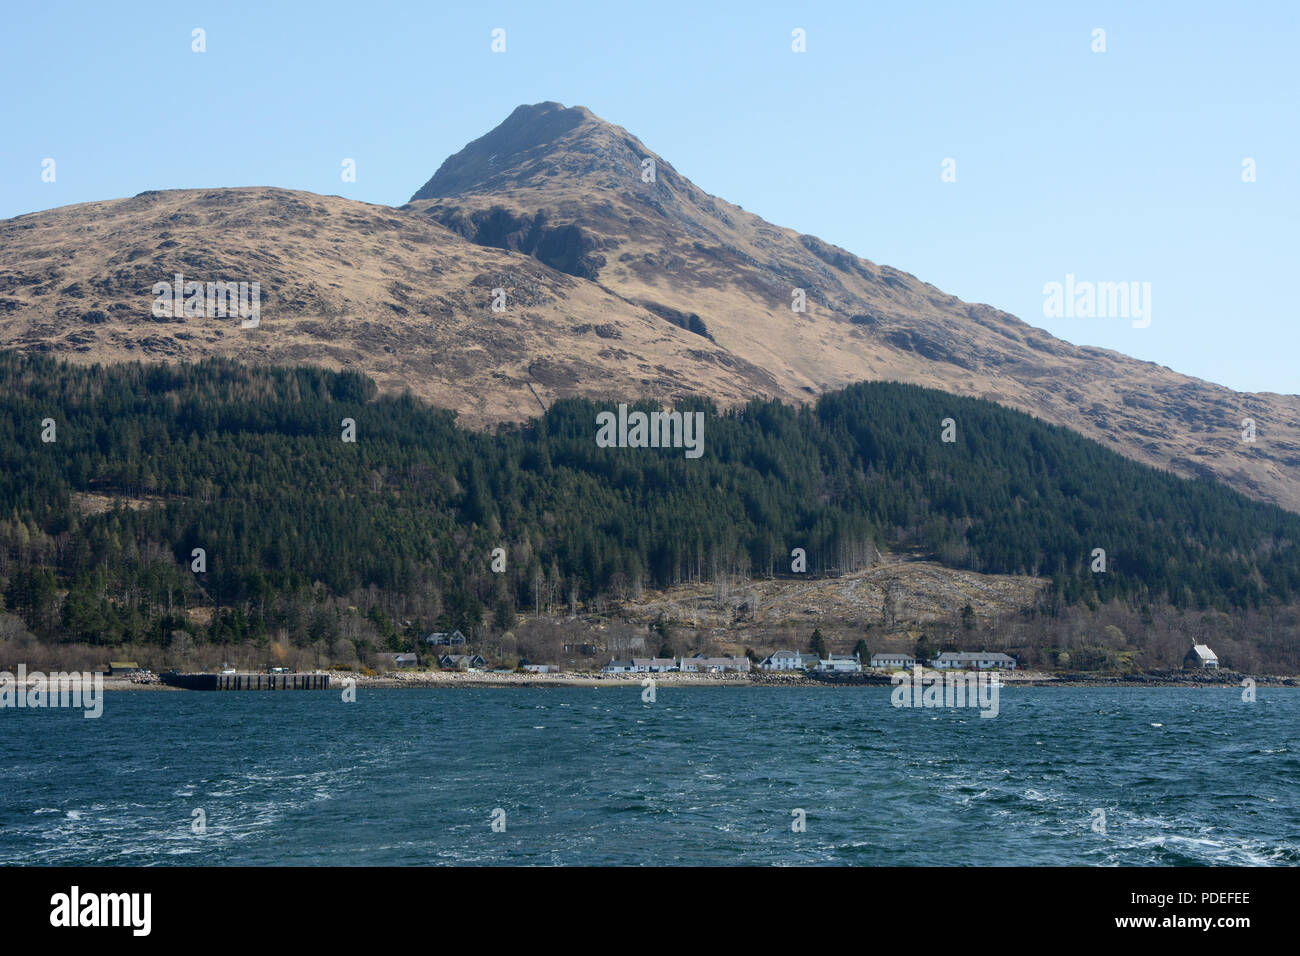 Mountains and forest above the village of Inverie, on Loch Nevis, in the Knoydart Peninsula, northwest Scottish Highlands, Scotland, Great Britain. Stock Photo